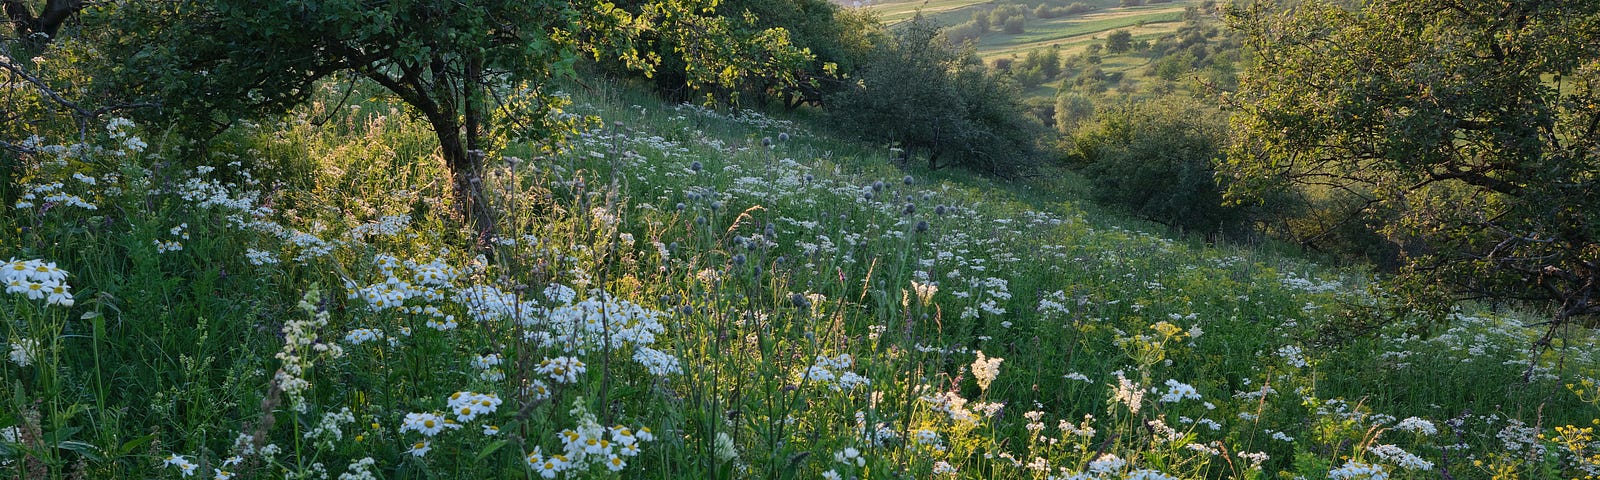 Hill covered in wildflowers.